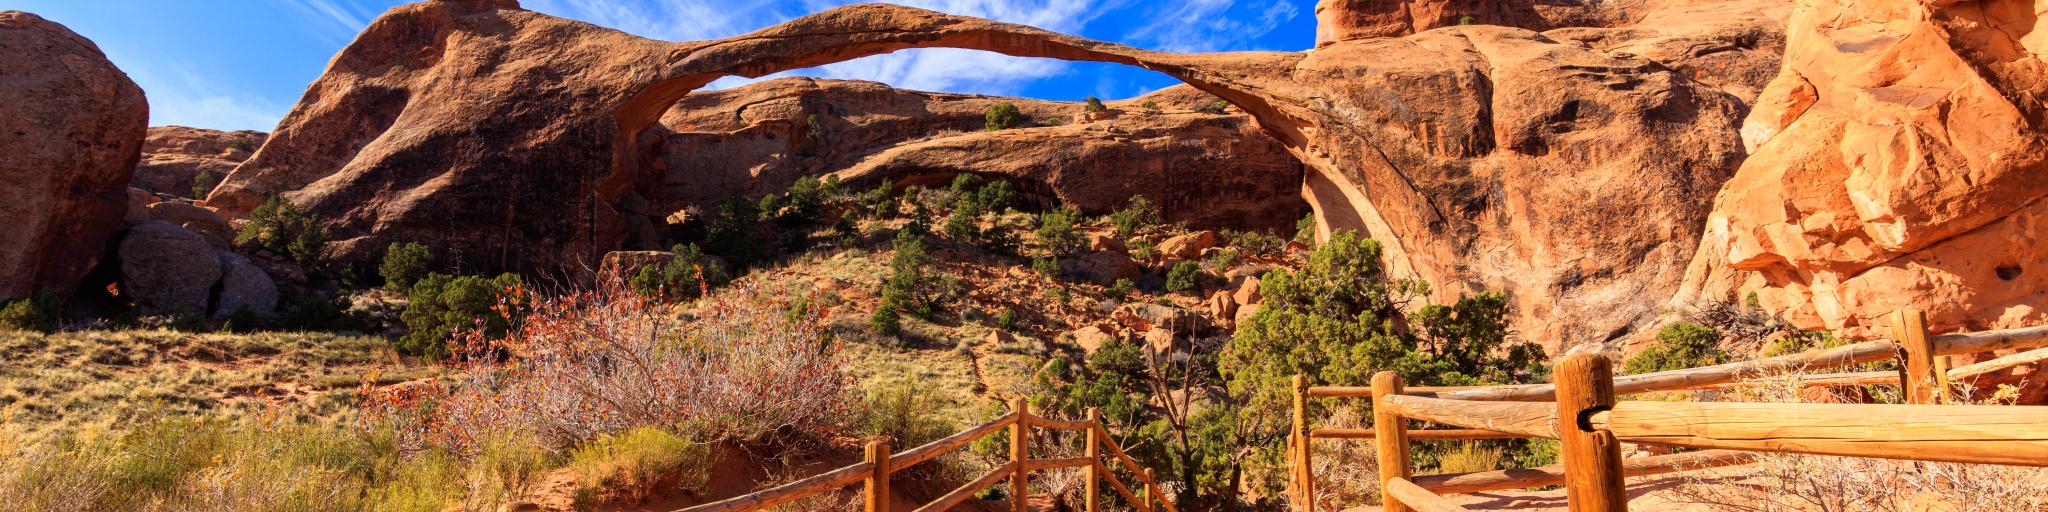 A beautiful pathway leading through the natural beauty of Arches National Park in Utah.